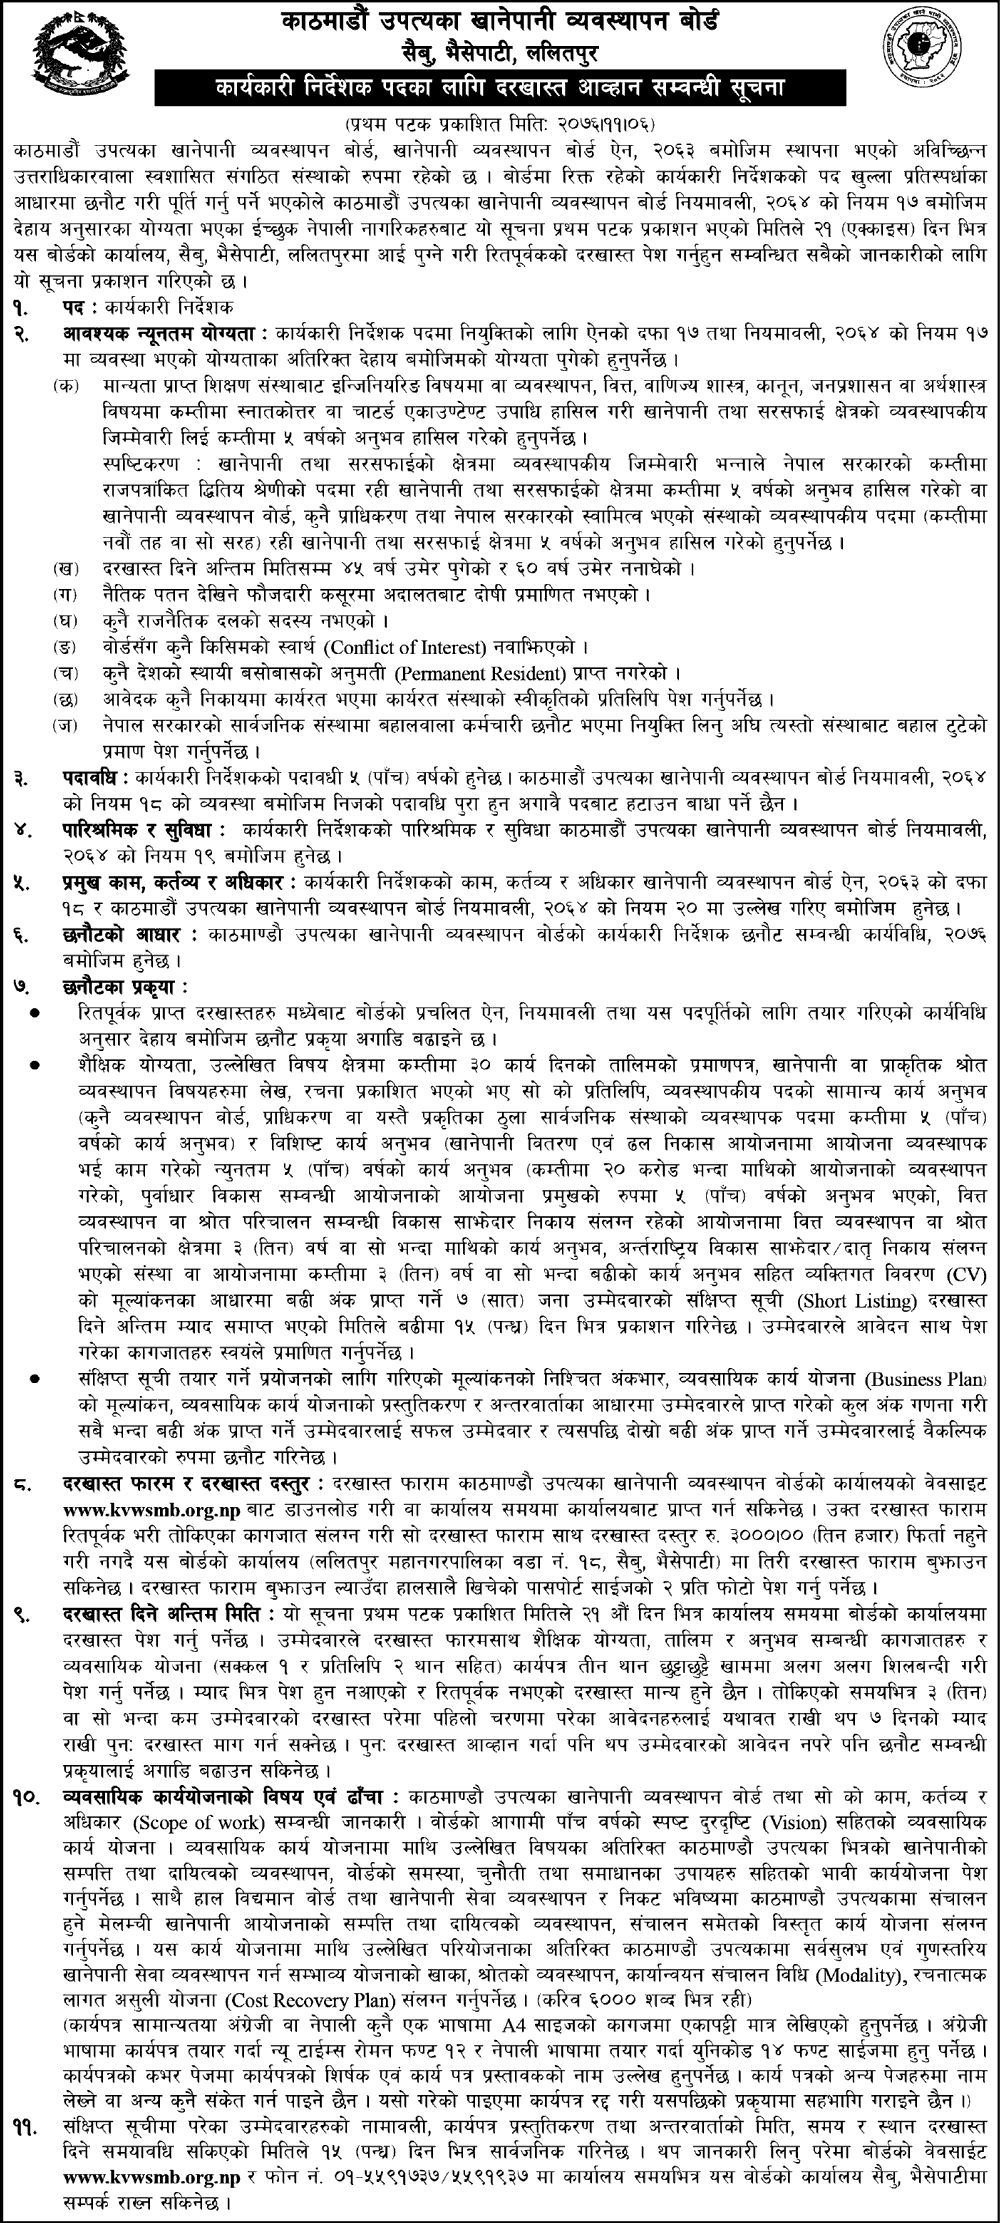 Kathmandu Valley Water Supply Management Board Vacancy for Executive Director (ED)